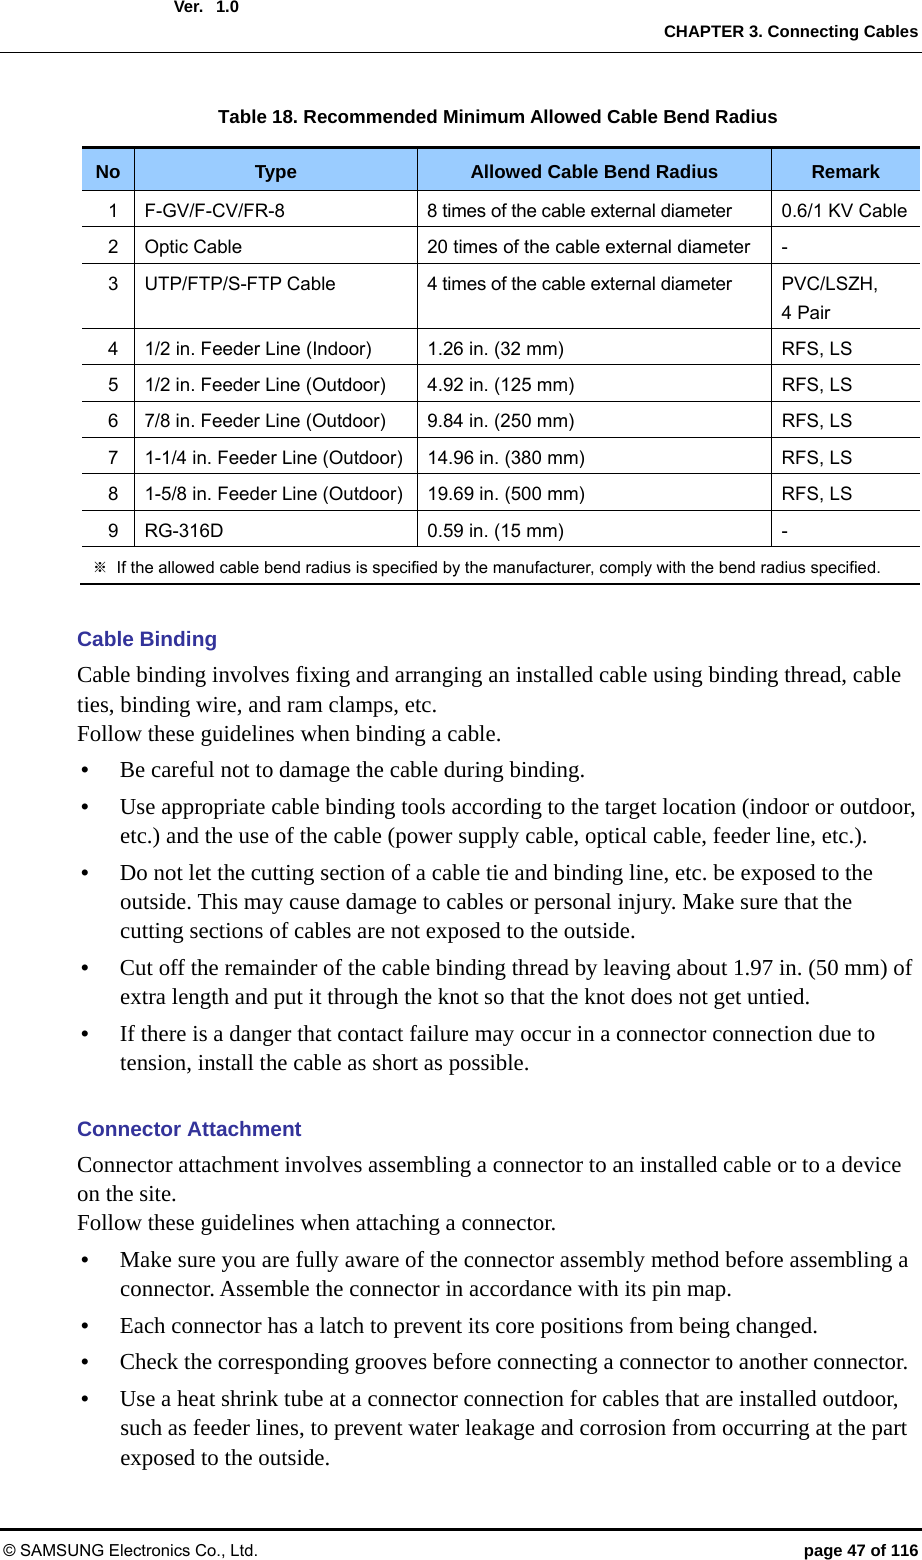  Ver.  CHAPTER 3. Connecting Cables © SAMSUNG Electronics Co., Ltd.  page 47 of 116 1.0 Table 18. Recommended Minimum Allowed Cable Bend Radius No  Type  Allowed Cable Bend Radius  Remark 1  F-GV/F-CV/FR-8  8 times of the cable external diameter  0.6/1 KV Cable2  Optic Cable  20 times of the cable external diameter  - 3  UTP/FTP/S-FTP Cable  4 times of the cable external diameter  PVC/LSZH,   4 Pair 4  1/2 in. Feeder Line (Indoor)  1.26 in. (32 mm)  RFS, LS 5  1/2 in. Feeder Line (Outdoor)  4.92 in. (125 mm)  RFS, LS 6  7/8 in. Feeder Line (Outdoor)  9.84 in. (250 mm)  RFS, LS 7  1-1/4 in. Feeder Line (Outdoor) 14.96 in. (380 mm)  RFS, LS 8  1-5/8 in. Feeder Line (Outdoor) 19.69 in. (500 mm)  RFS, LS 9  RG-316D  0.59 in. (15 mm)  - ※  If the allowed cable bend radius is specified by the manufacturer, comply with the bend radius specified.  Cable Binding Cable binding involves fixing and arranging an installed cable using binding thread, cable ties, binding wire, and ram clamps, etc. Follow these guidelines when binding a cable.   y Be careful not to damage the cable during binding. y Use appropriate cable binding tools according to the target location (indoor or outdoor, etc.) and the use of the cable (power supply cable, optical cable, feeder line, etc.). y Do not let the cutting section of a cable tie and binding line, etc. be exposed to the outside. This may cause damage to cables or personal injury. Make sure that the cutting sections of cables are not exposed to the outside. y Cut off the remainder of the cable binding thread by leaving about 1.97 in. (50 mm) of extra length and put it through the knot so that the knot does not get untied. y If there is a danger that contact failure may occur in a connector connection due to tension, install the cable as short as possible.  Connector Attachment Connector attachment involves assembling a connector to an installed cable or to a device on the site. Follow these guidelines when attaching a connector.   y Make sure you are fully aware of the connector assembly method before assembling a connector. Assemble the connector in accordance with its pin map. y Each connector has a latch to prevent its core positions from being changed. y Check the corresponding grooves before connecting a connector to another connector. y Use a heat shrink tube at a connector connection for cables that are installed outdoor, such as feeder lines, to prevent water leakage and corrosion from occurring at the part exposed to the outside. 